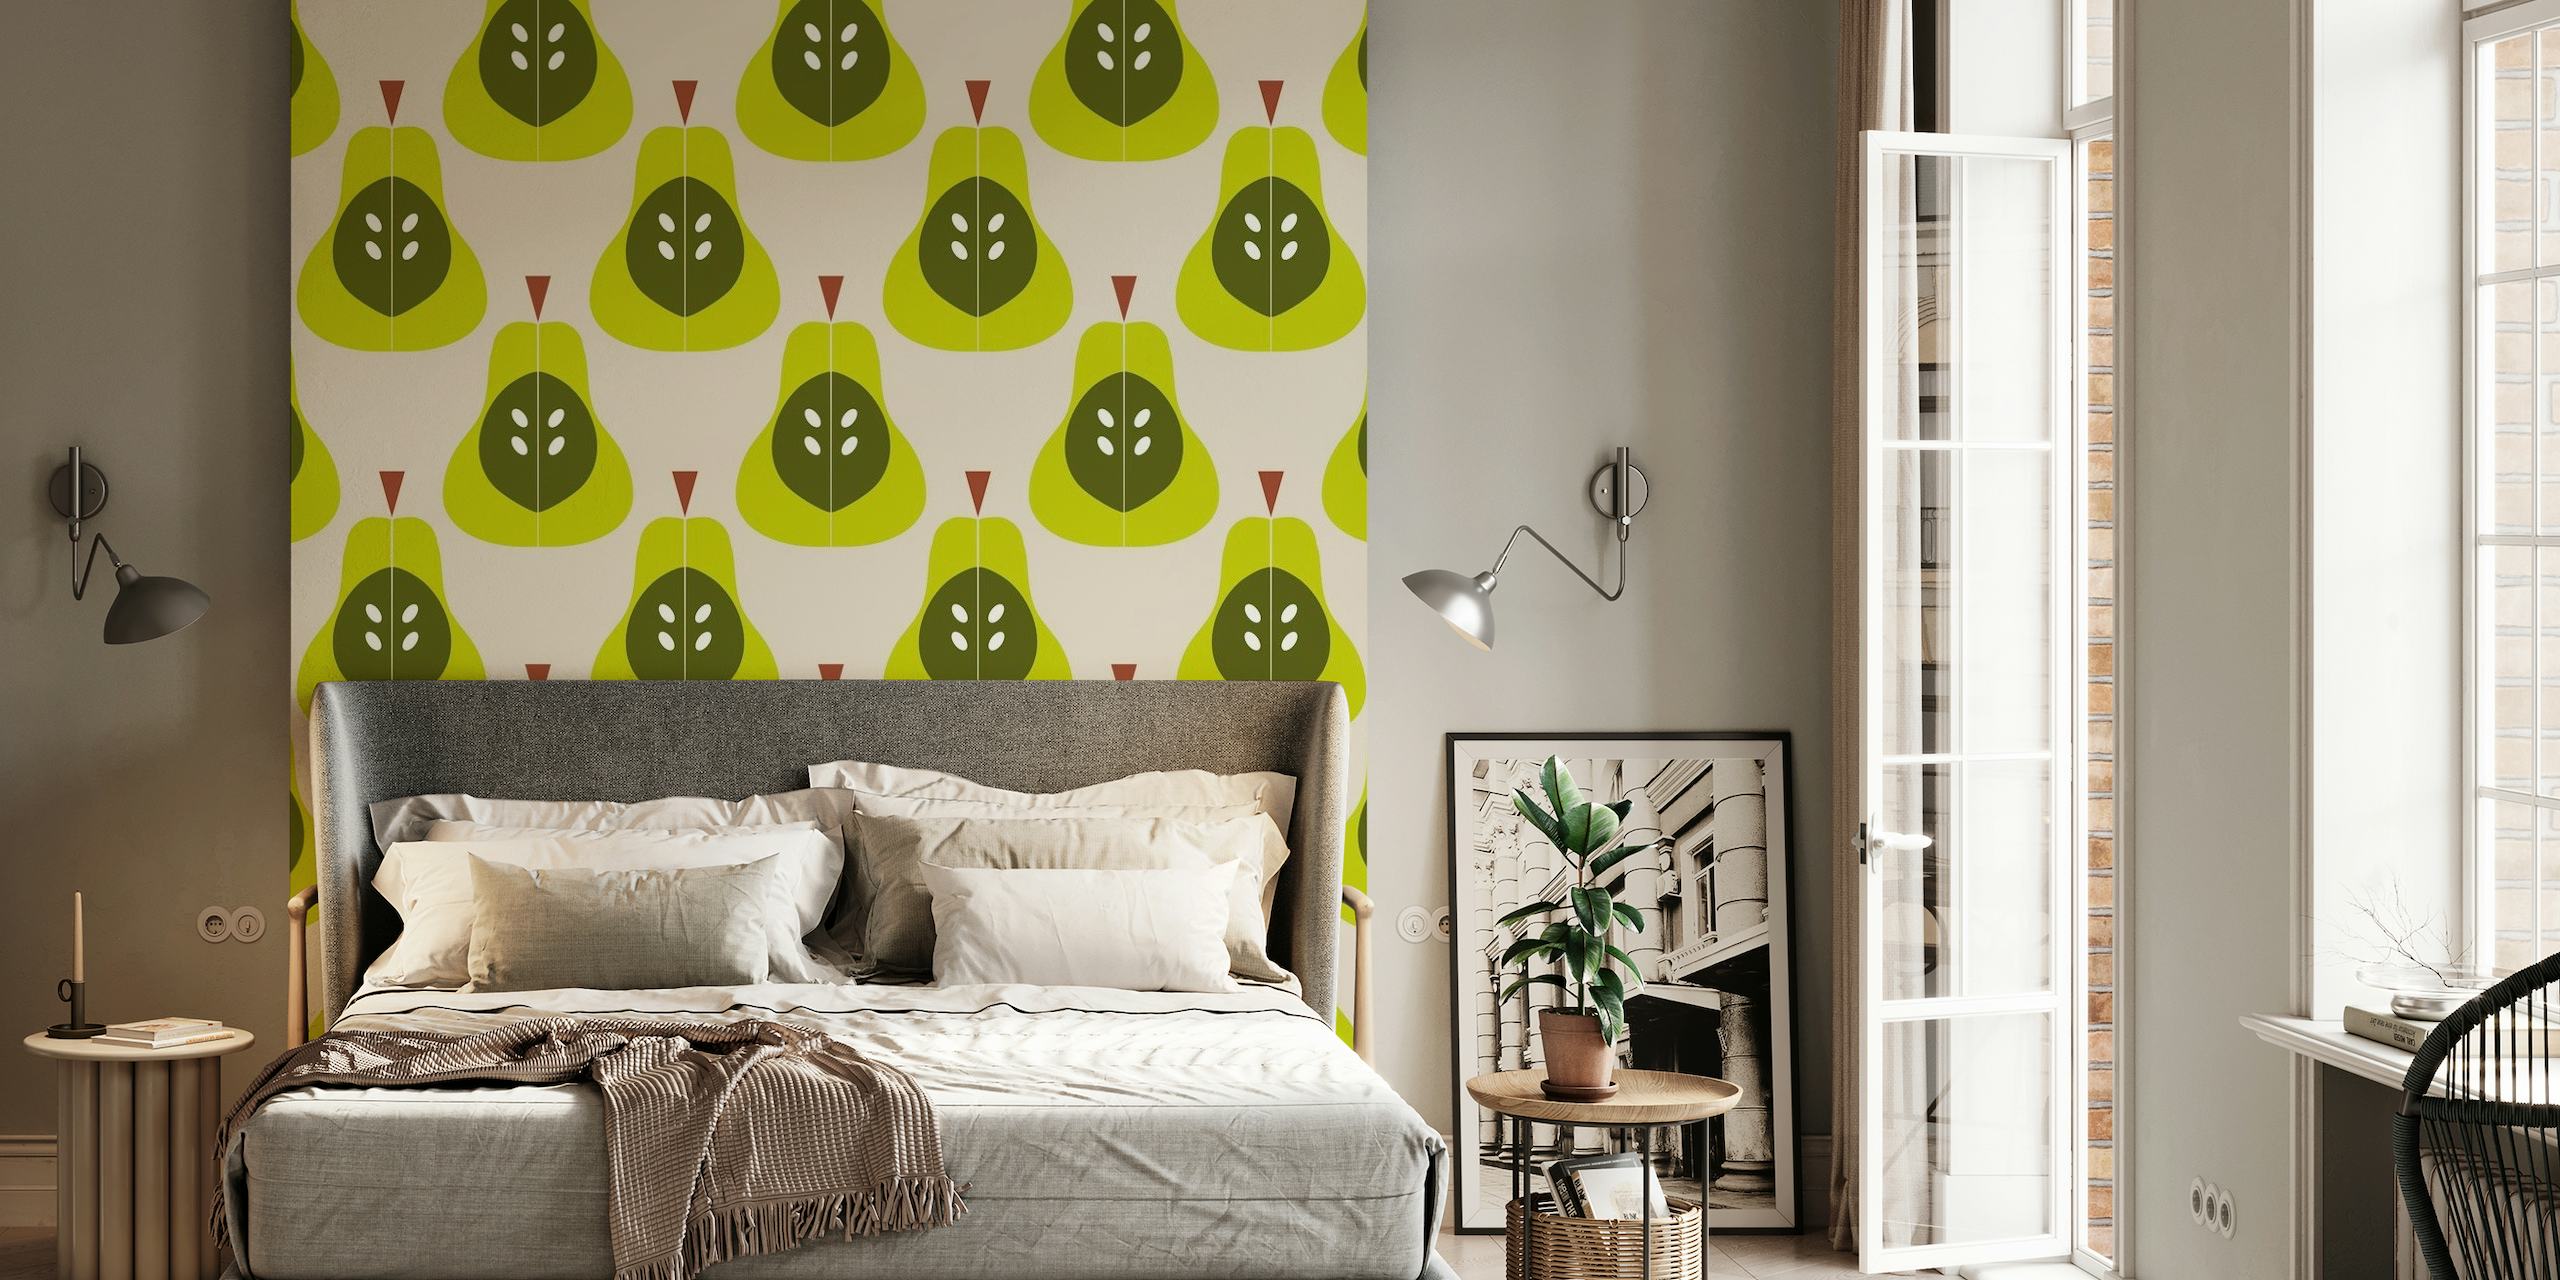 Green Pears wall mural with stylized pear and leaf pattern on neutral background